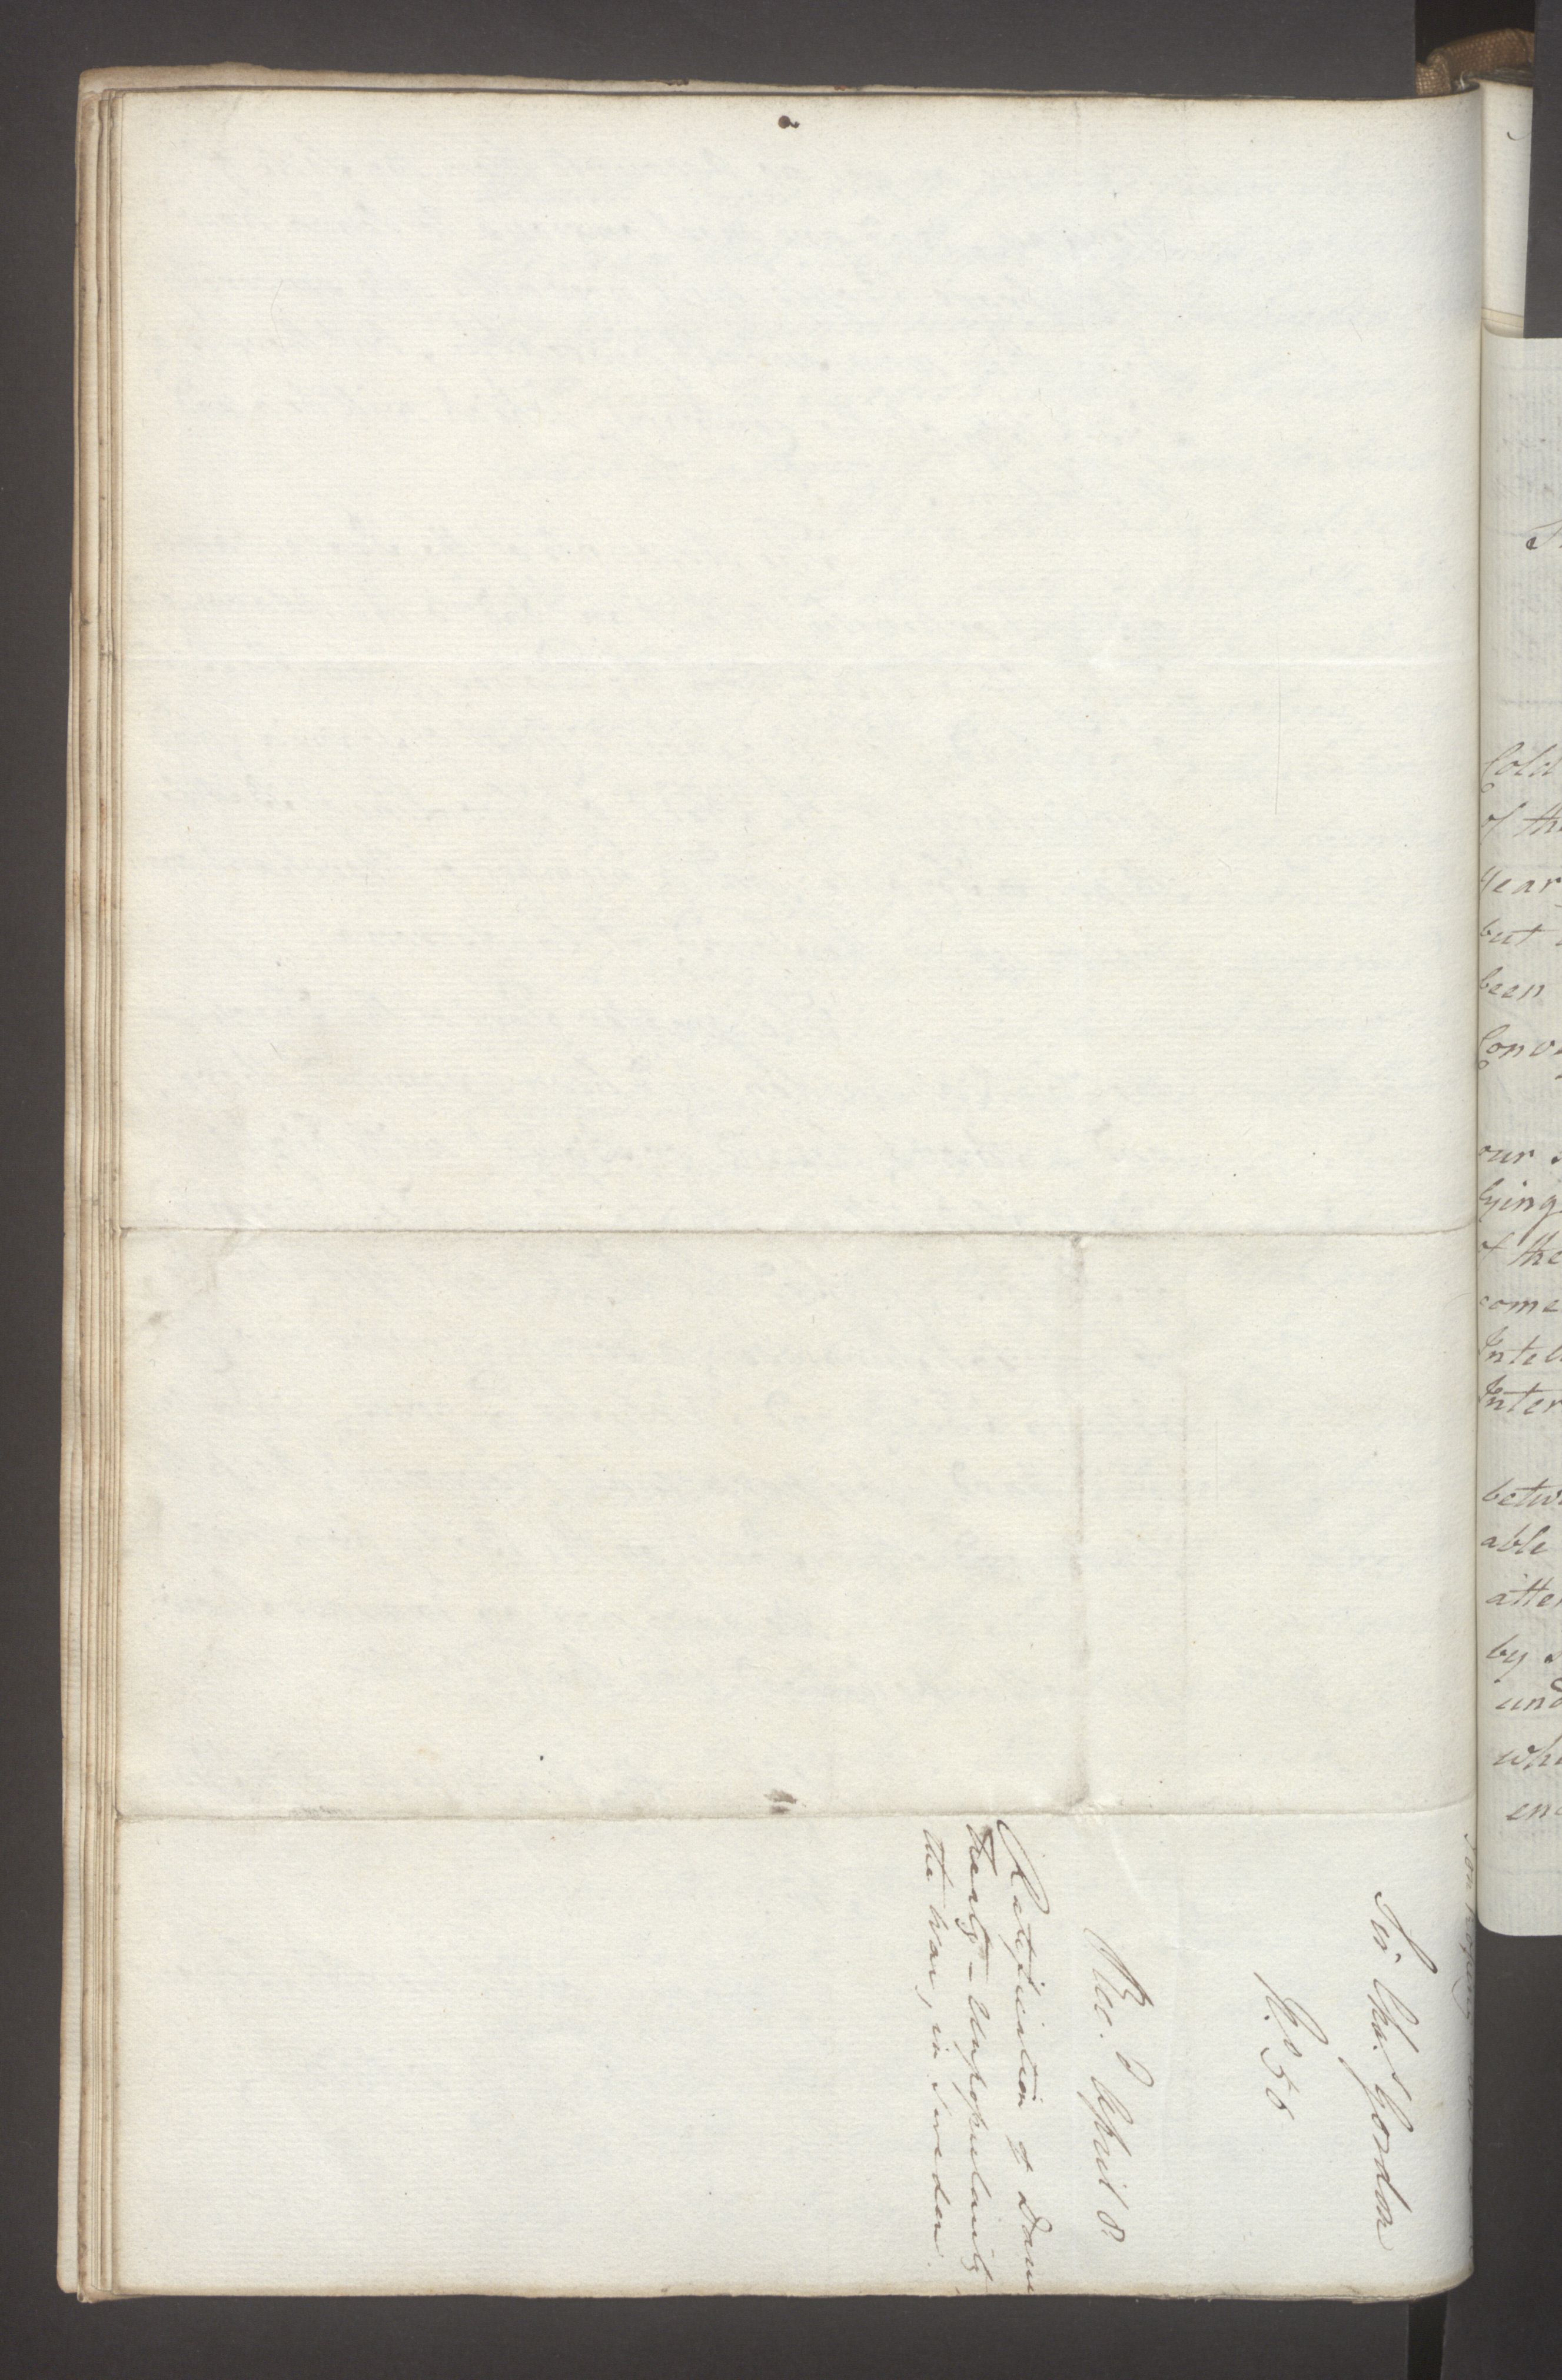 Foreign Office*, UKA/-/FO 38/16: Sir C. Gordon. Reports from Malmö, Jonkoping, and Helsingborg, 1814, p. 17